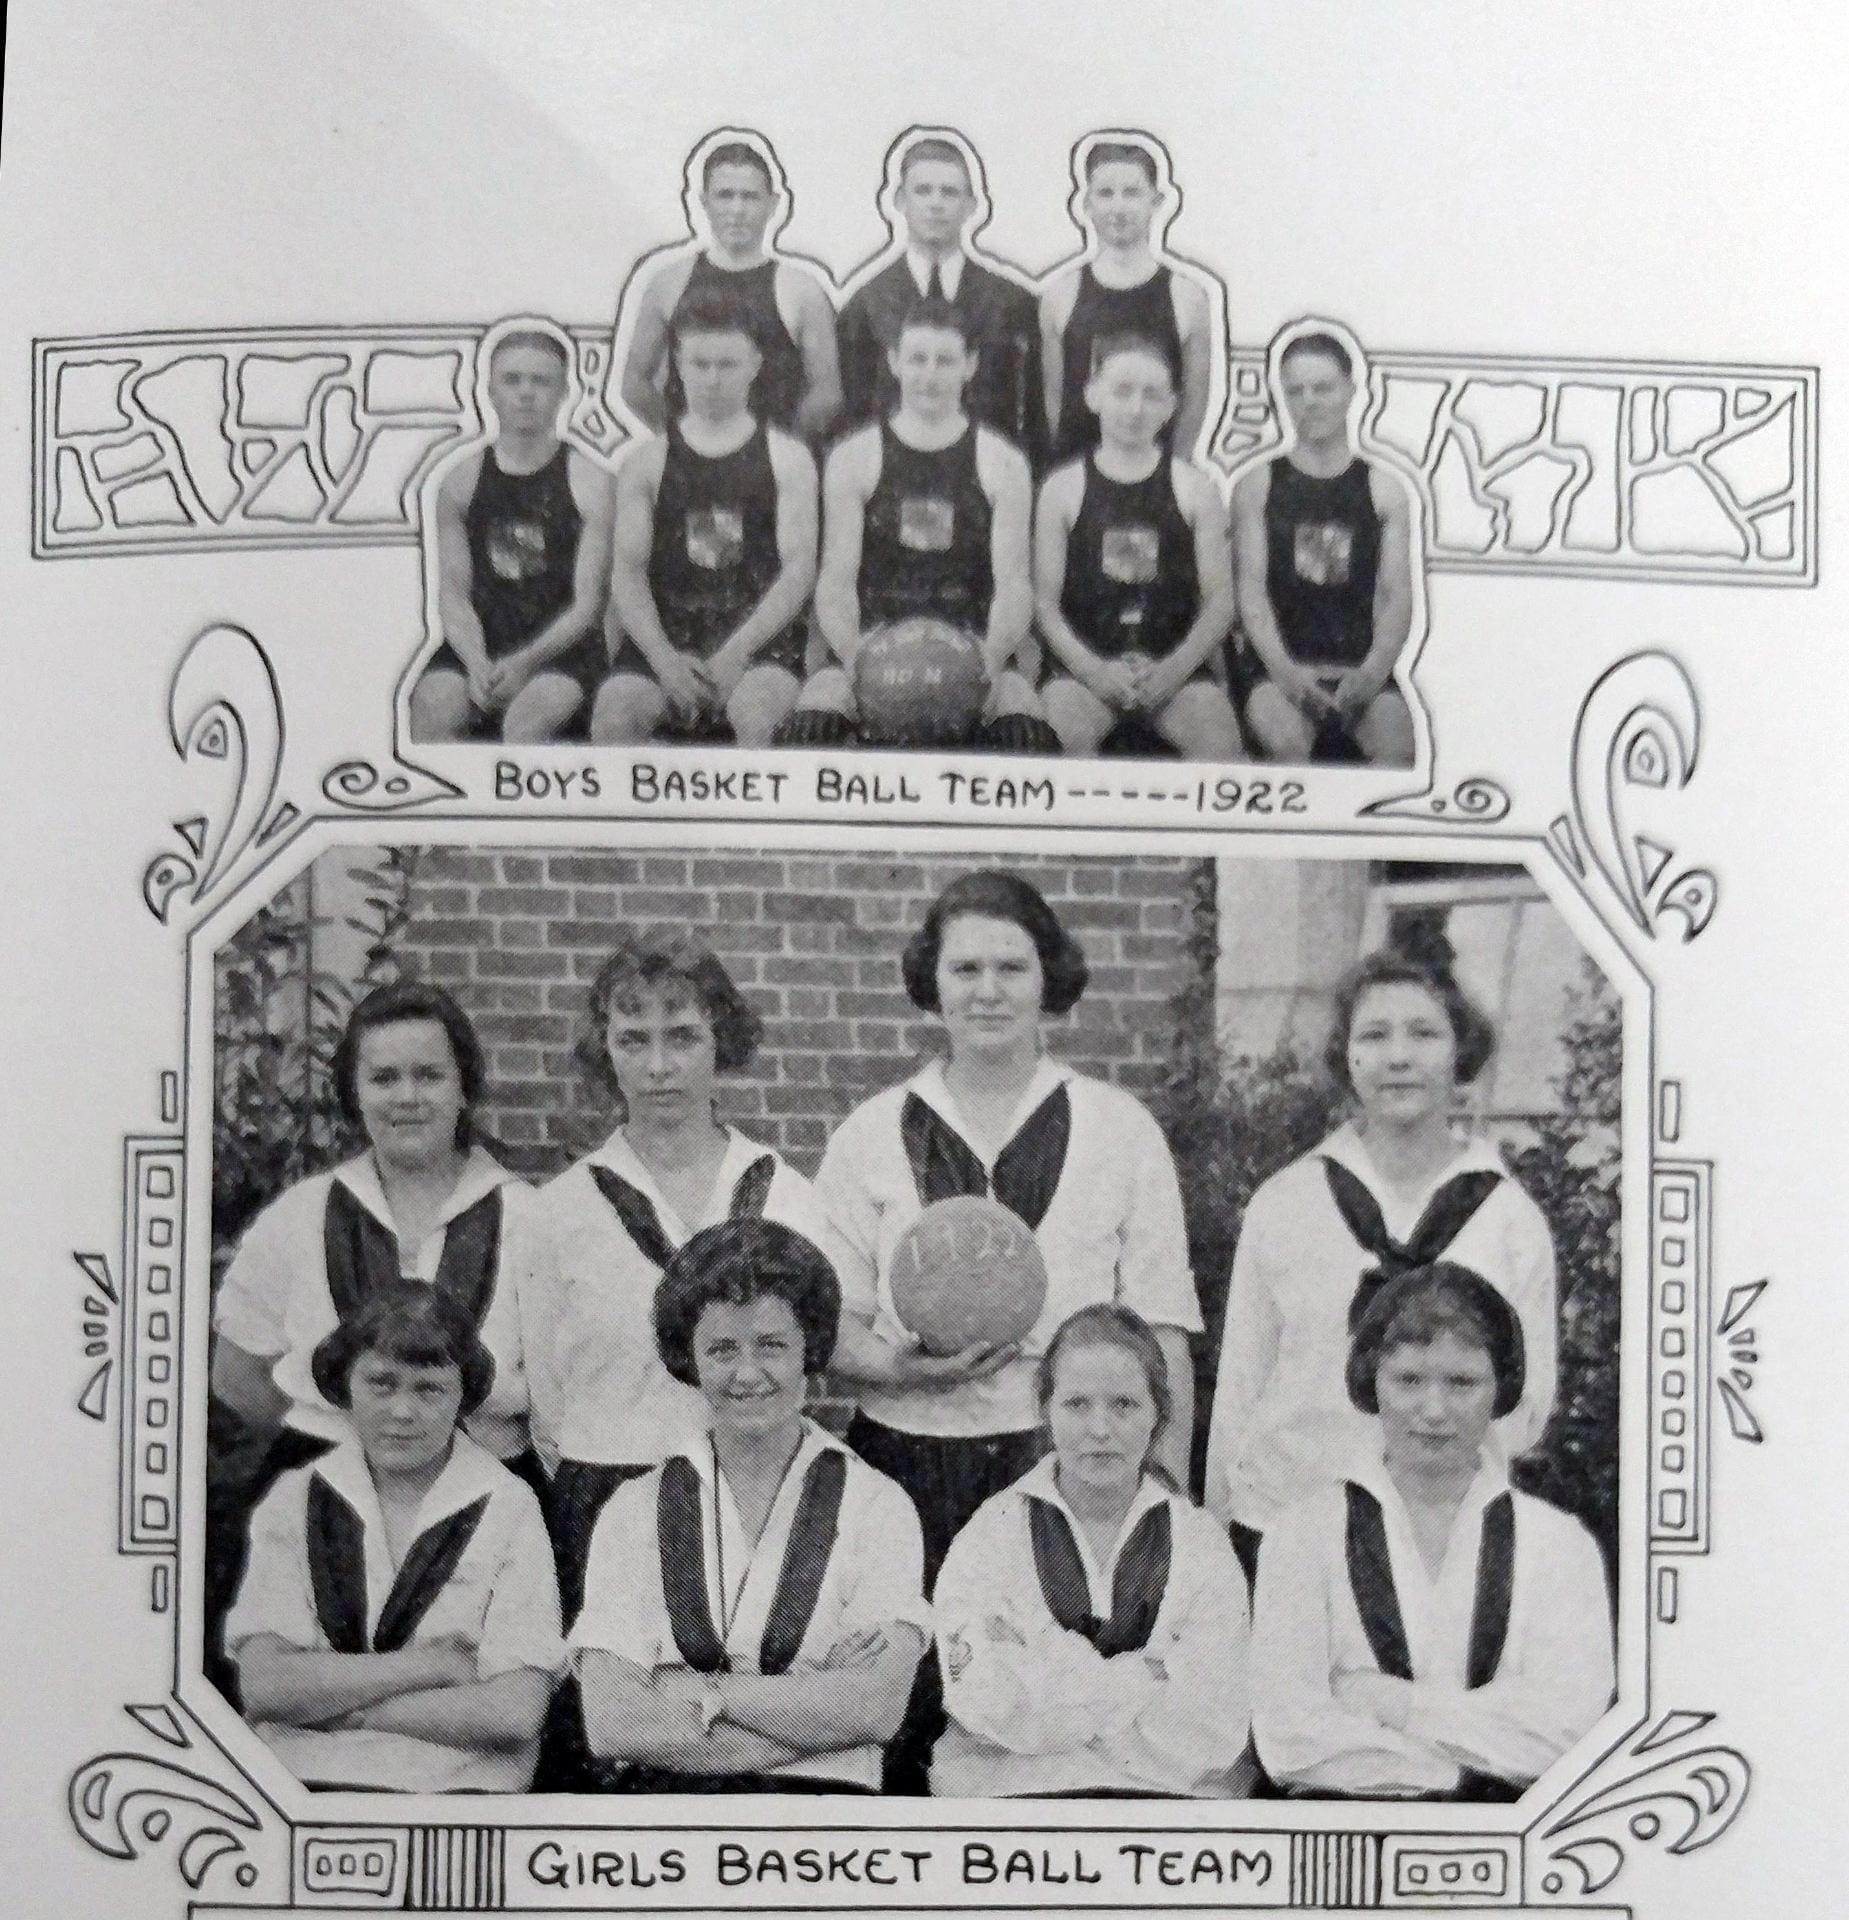 Photograph shows team of 7 men and 1 manager in a group with words "Boys Basket Ball Team -- 1922" and another photo of 8 women in a group with words Girls Basket Ball Team.